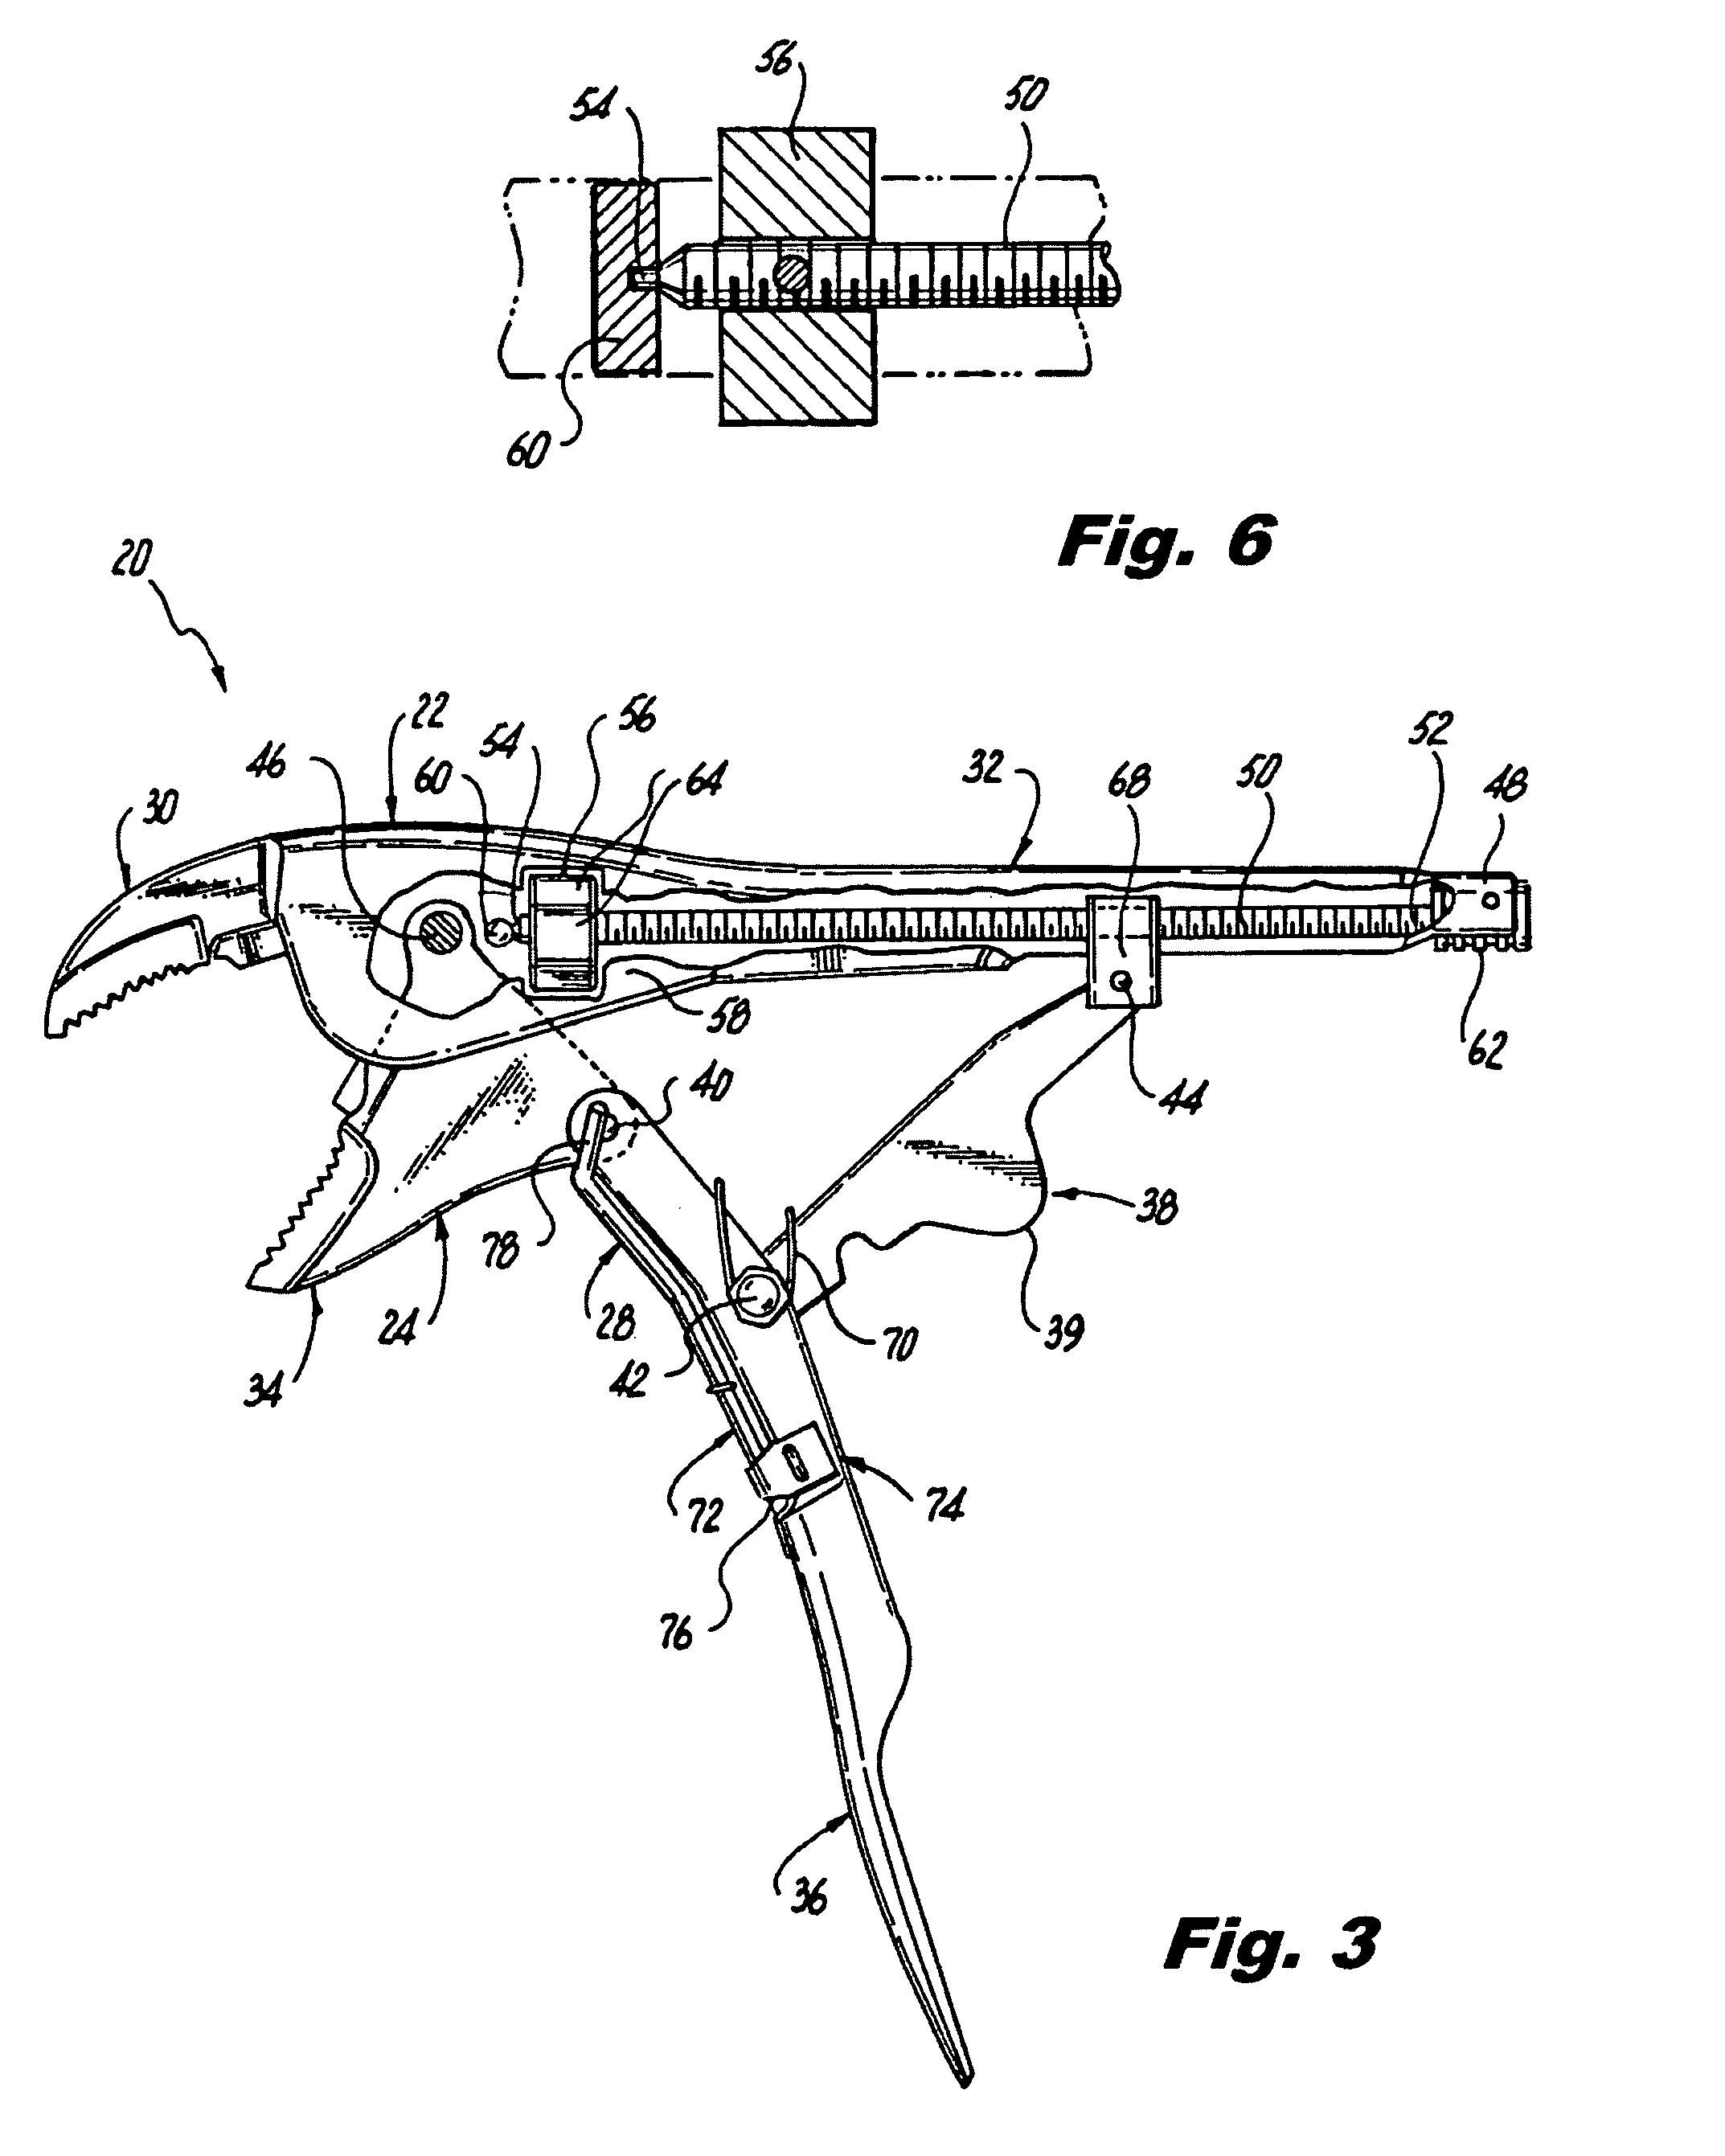 Locking pliers for being one-handed adjustable, clampable, and releasable